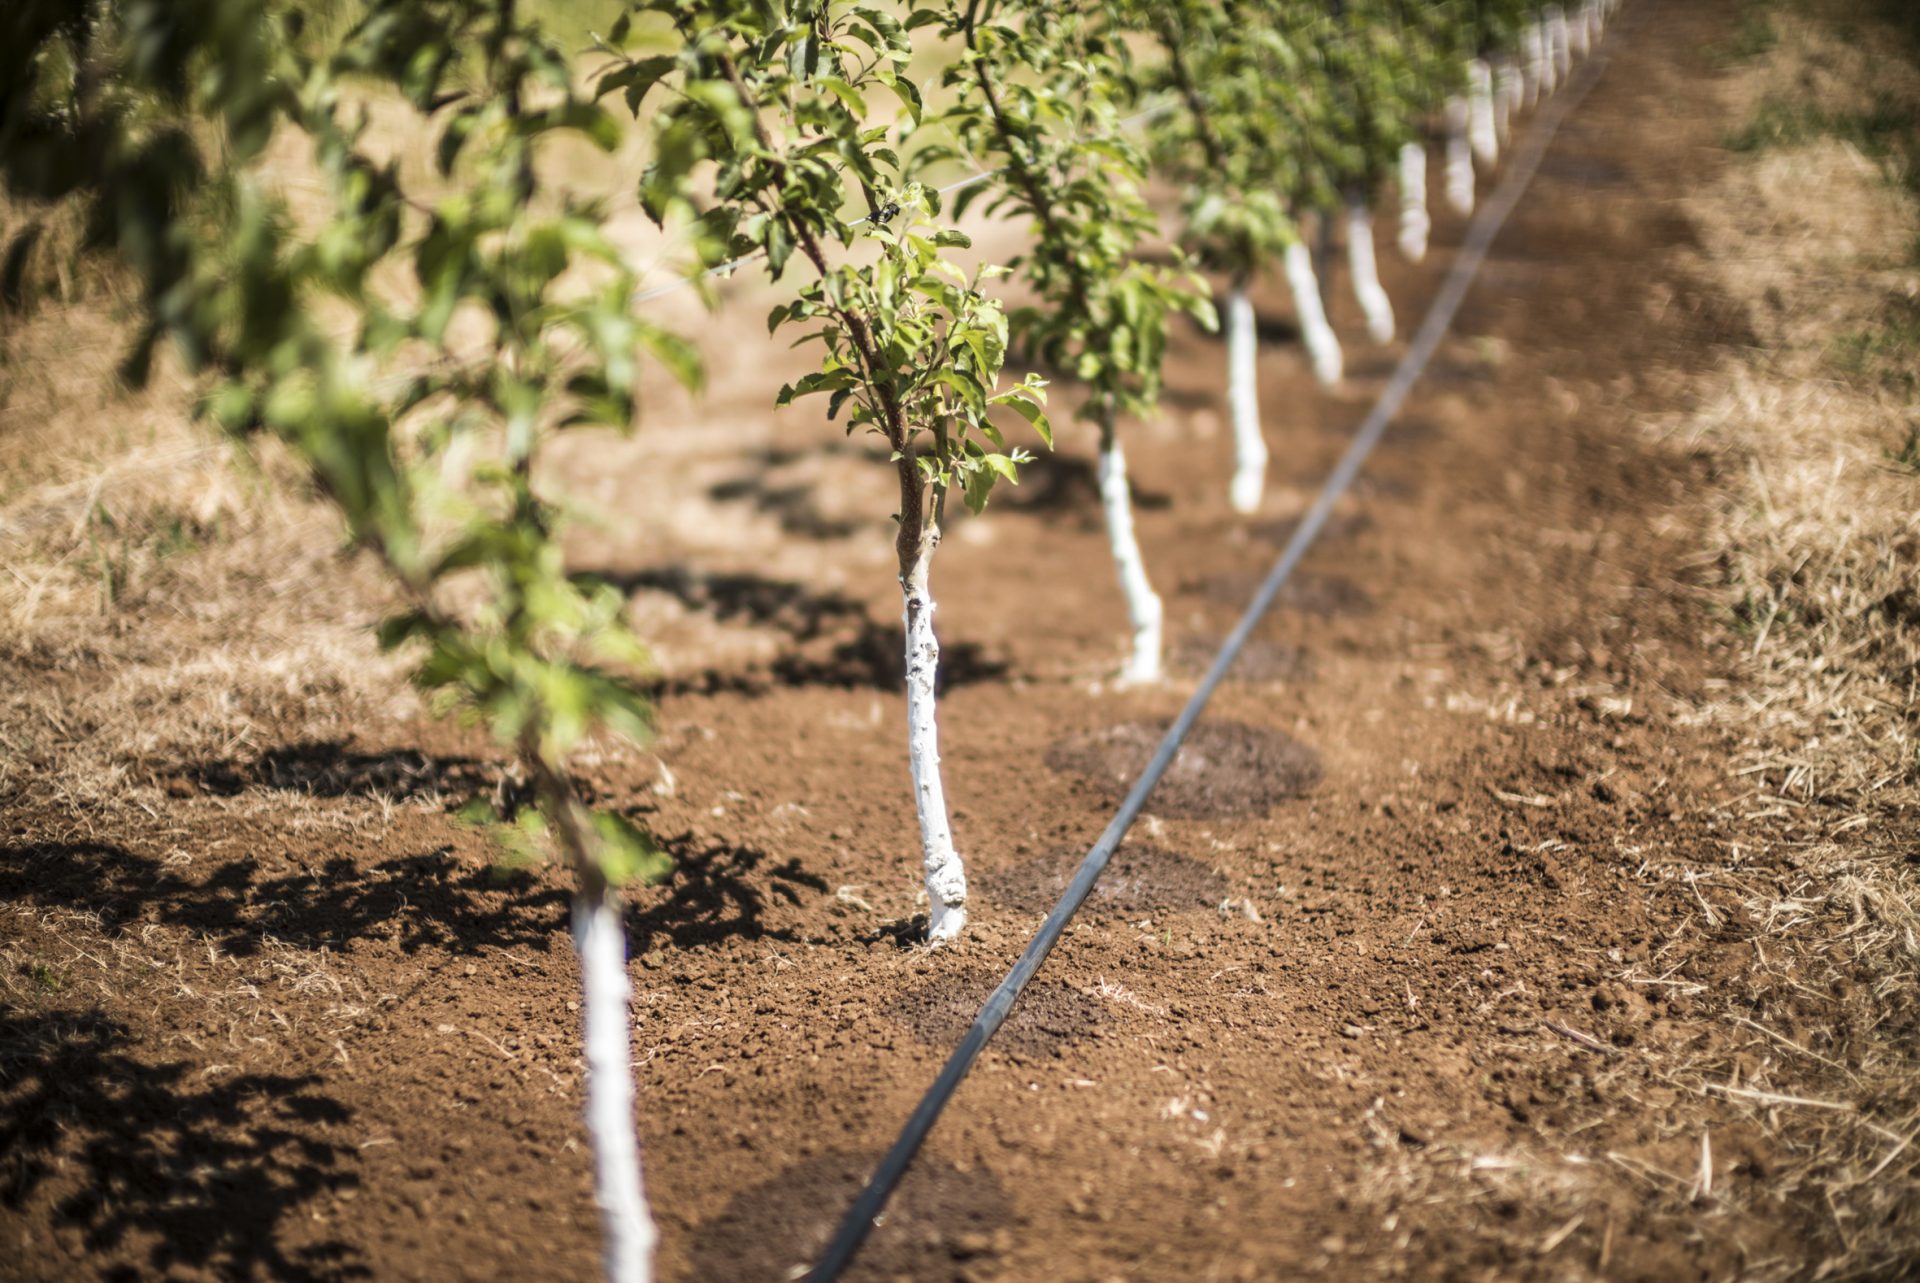 How To Install A Drip Irrigation System - www.inf-inet.com